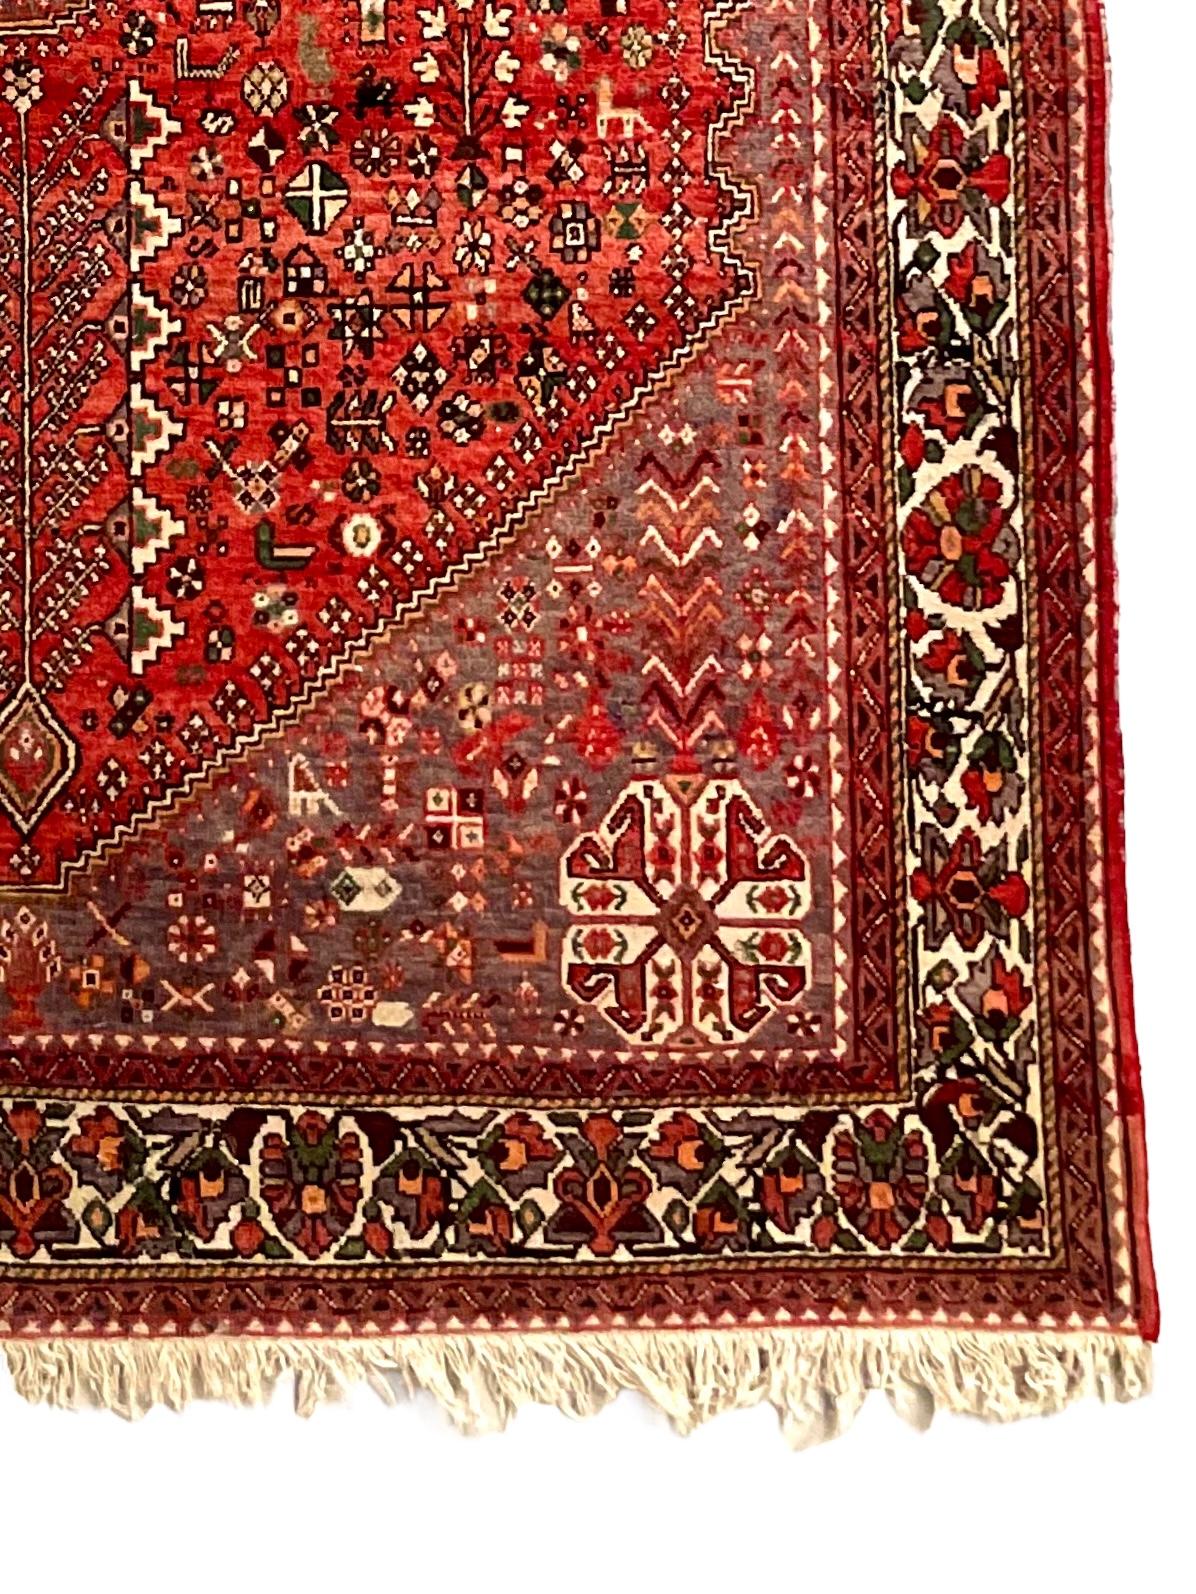 Hand-Woven Antique Persian Medallion Rug For Sale